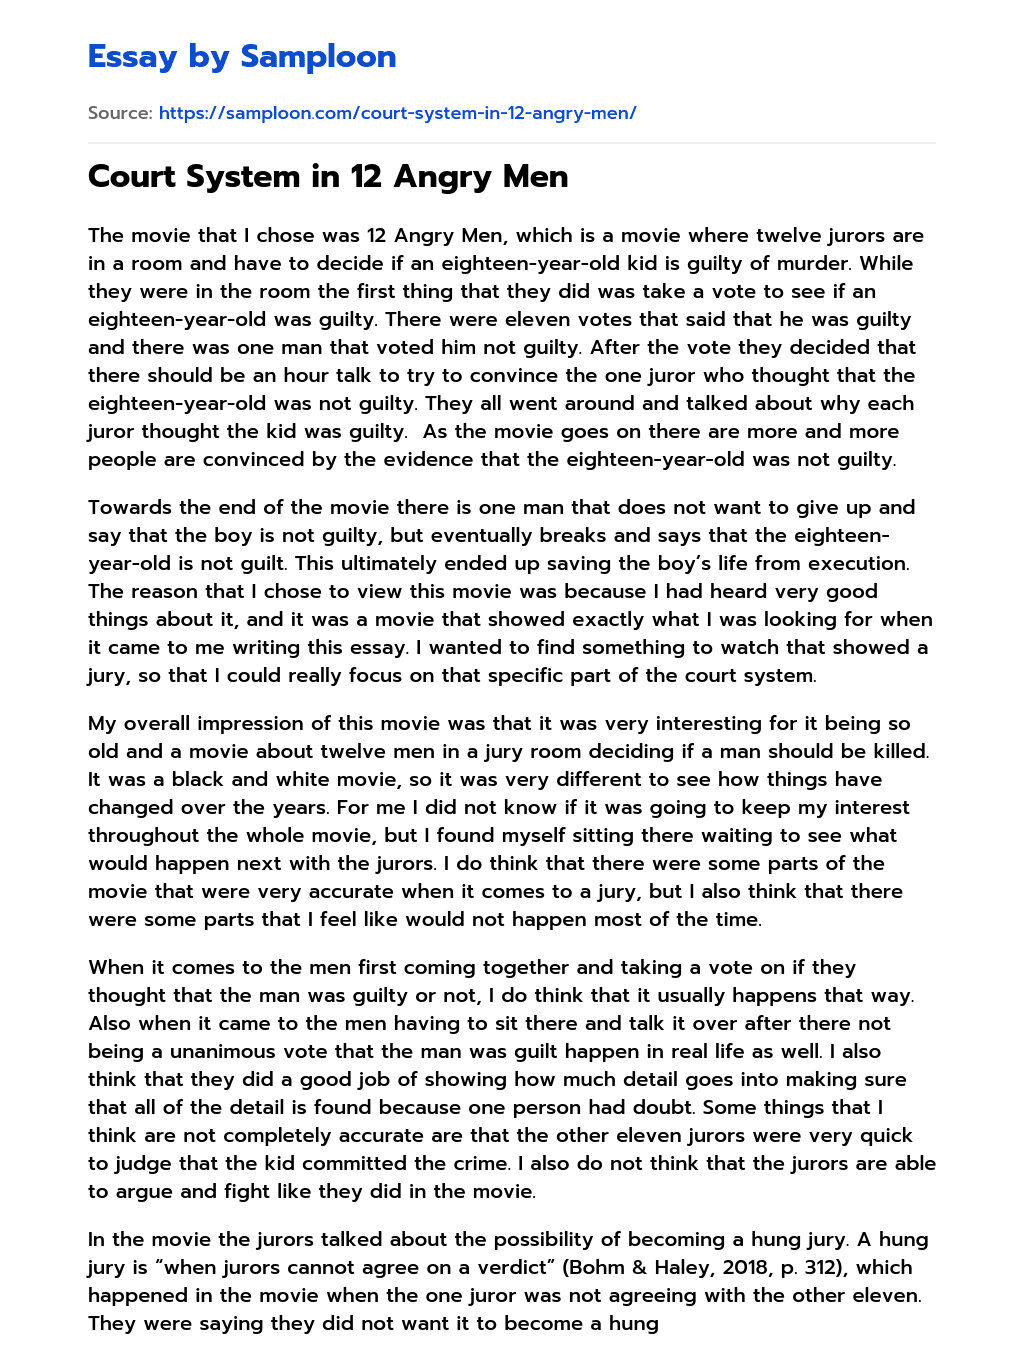 Court System in 12 Angry Men essay